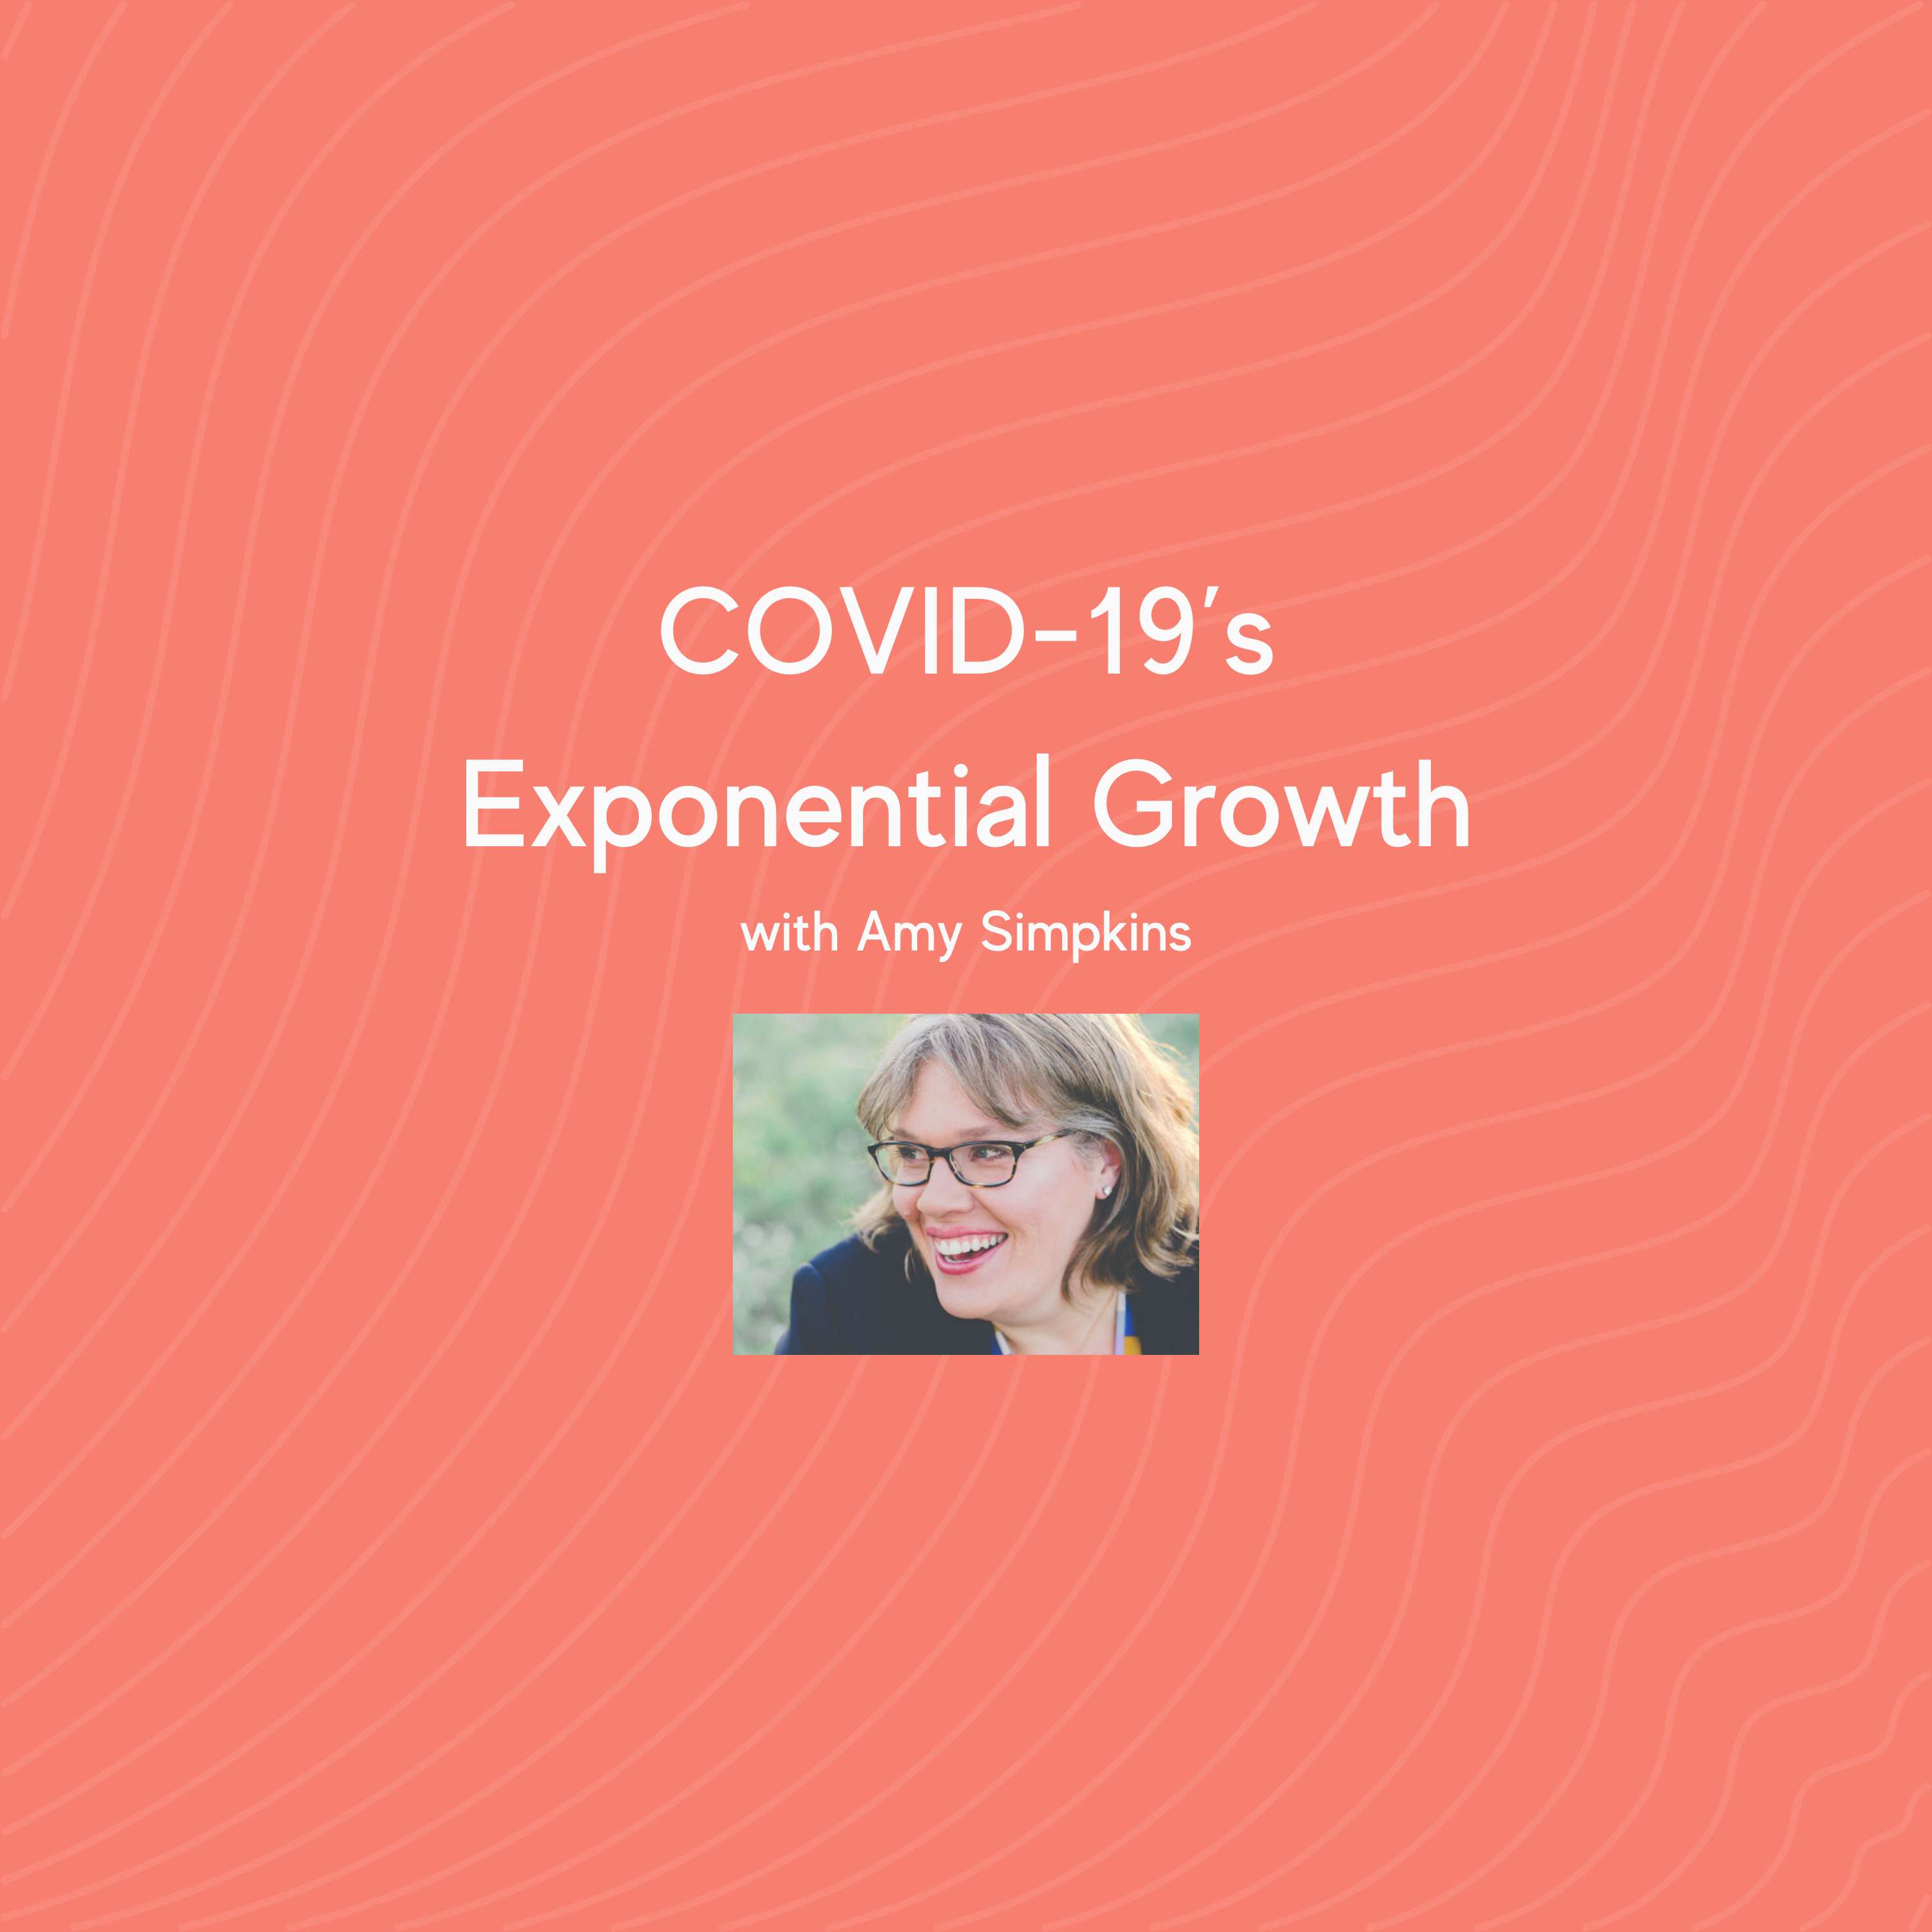 COVID-19’s Exponential Growth with Amy Simpkins